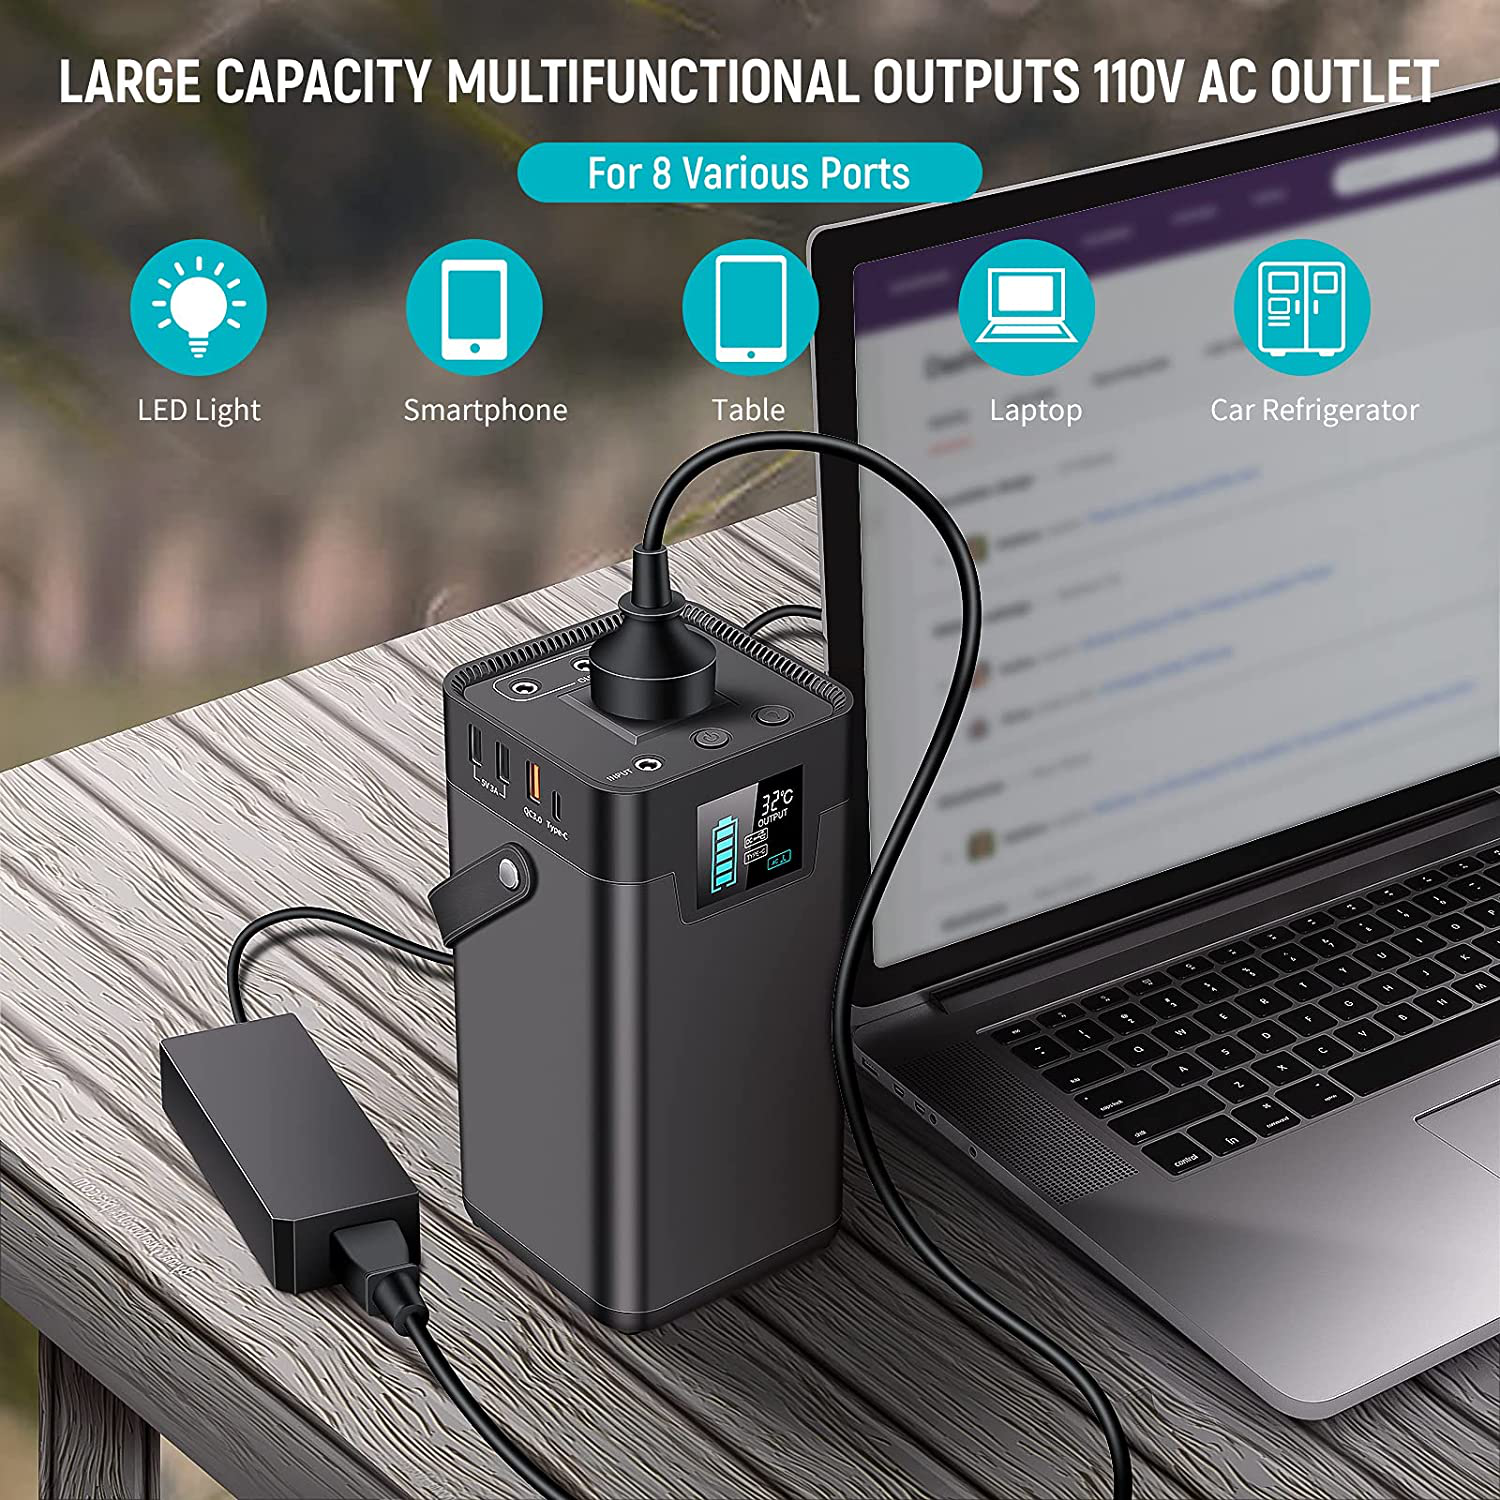 Portable Power Station 250W KOYOT Solar Generator 54600mAh (Solar Panel Not Included）Portable Battery With 110V AC Outlet/3 DC Ports/4 USB Ports For CPAP Outdoor Advanture Load Trip Camping Emergency